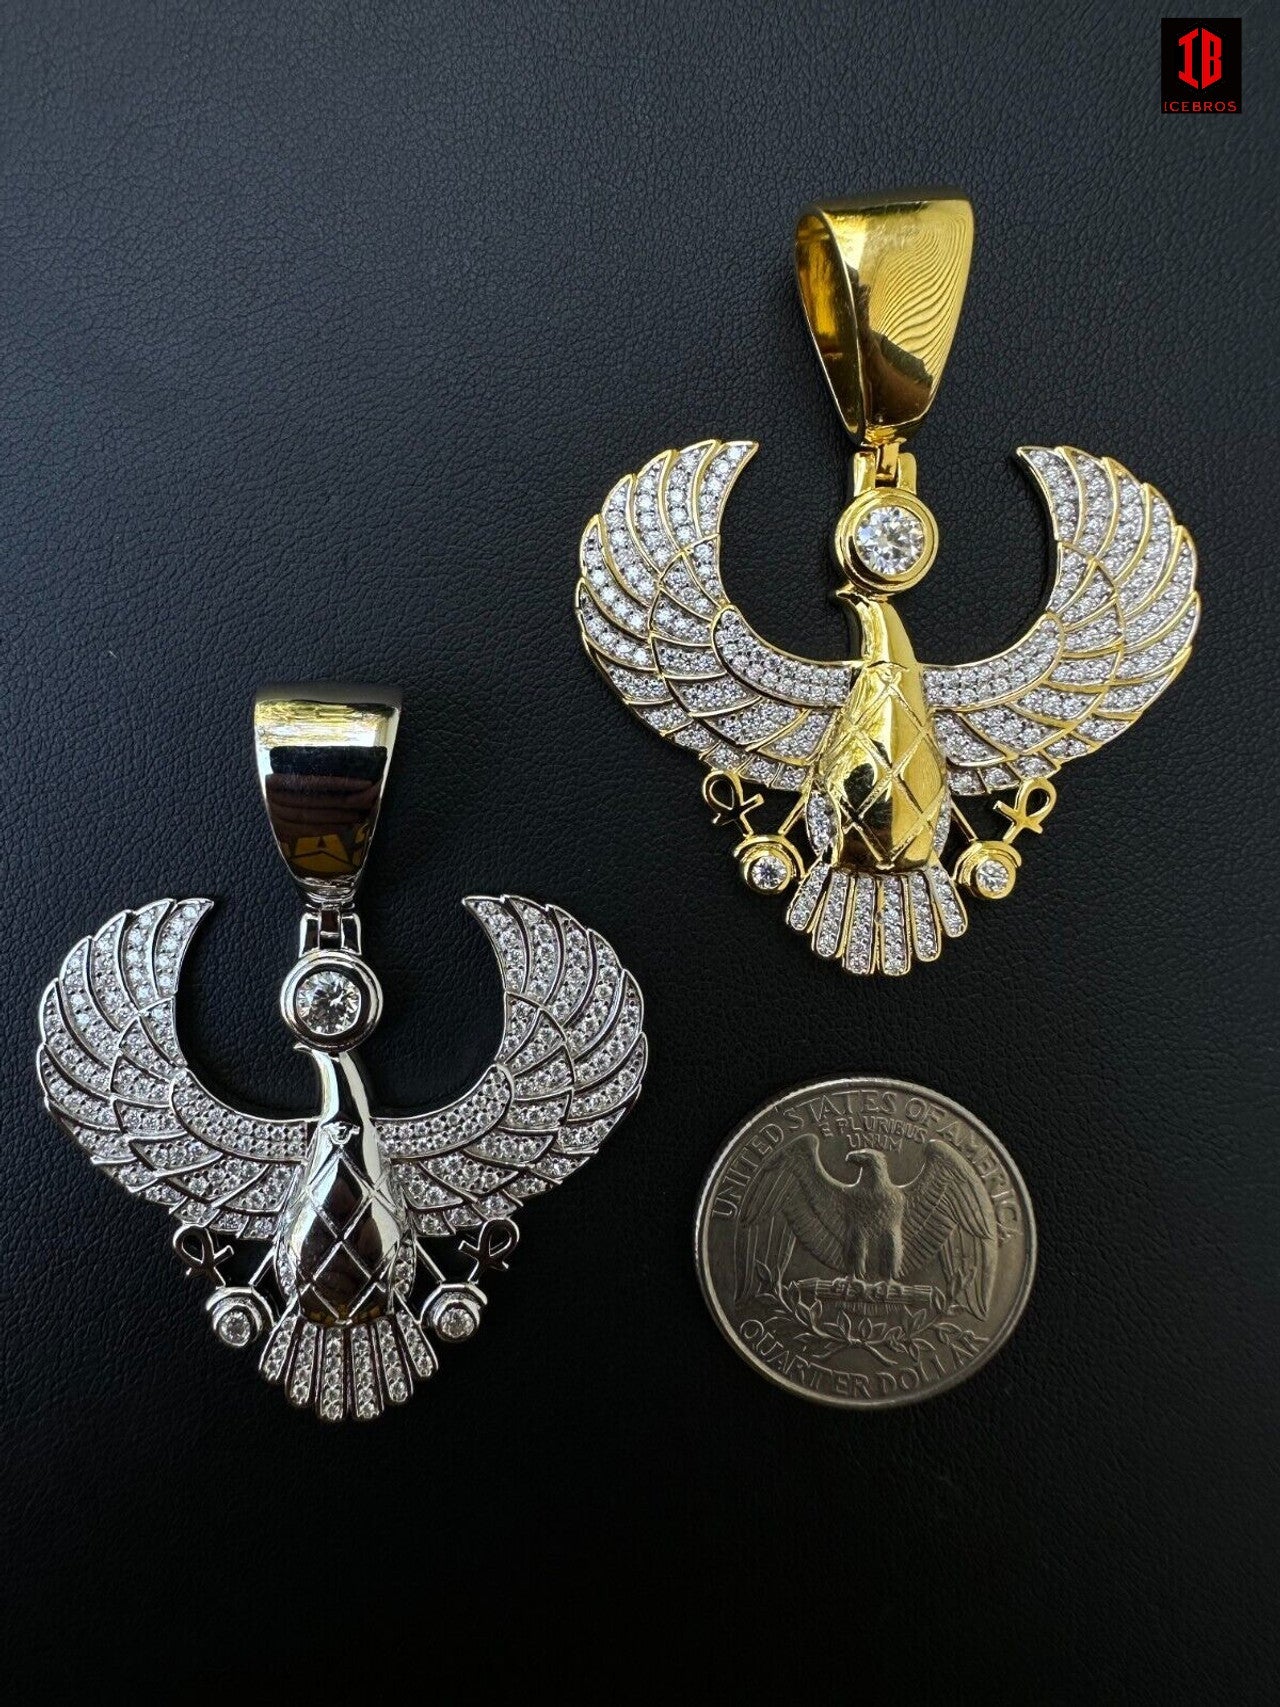 A Detailed View Of 14k White Gold or 14k Yellow Gold VVS Moissanite Horus Falcon Wing Pendant Necklace with Black Background 